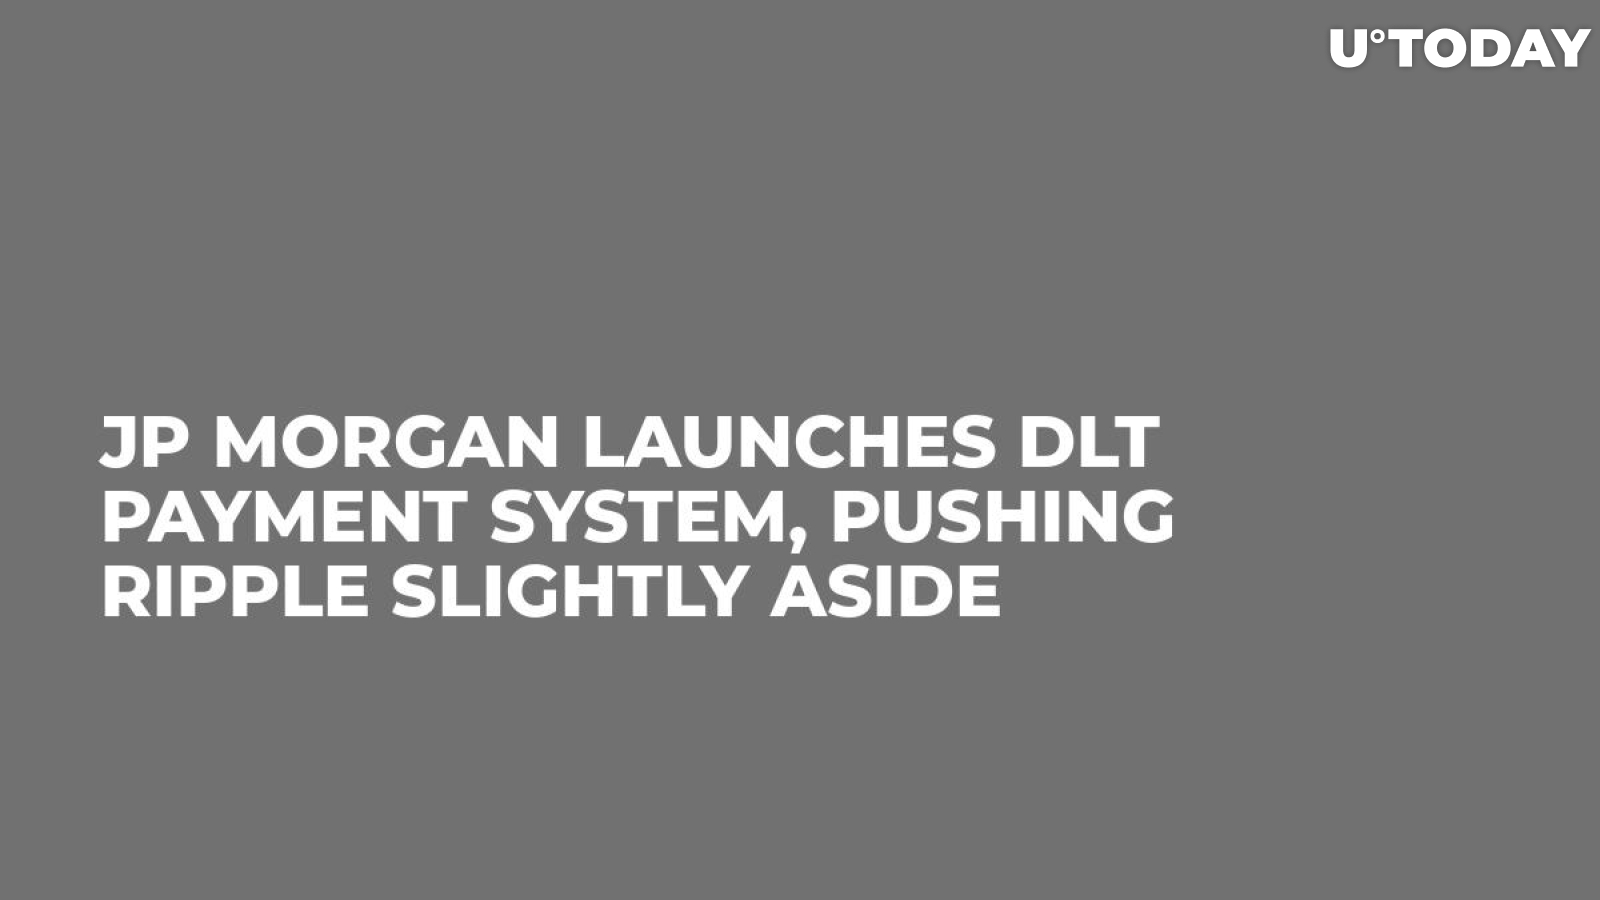 JP Morgan Launches DLT Payment System, Pushing Ripple Slightly Aside